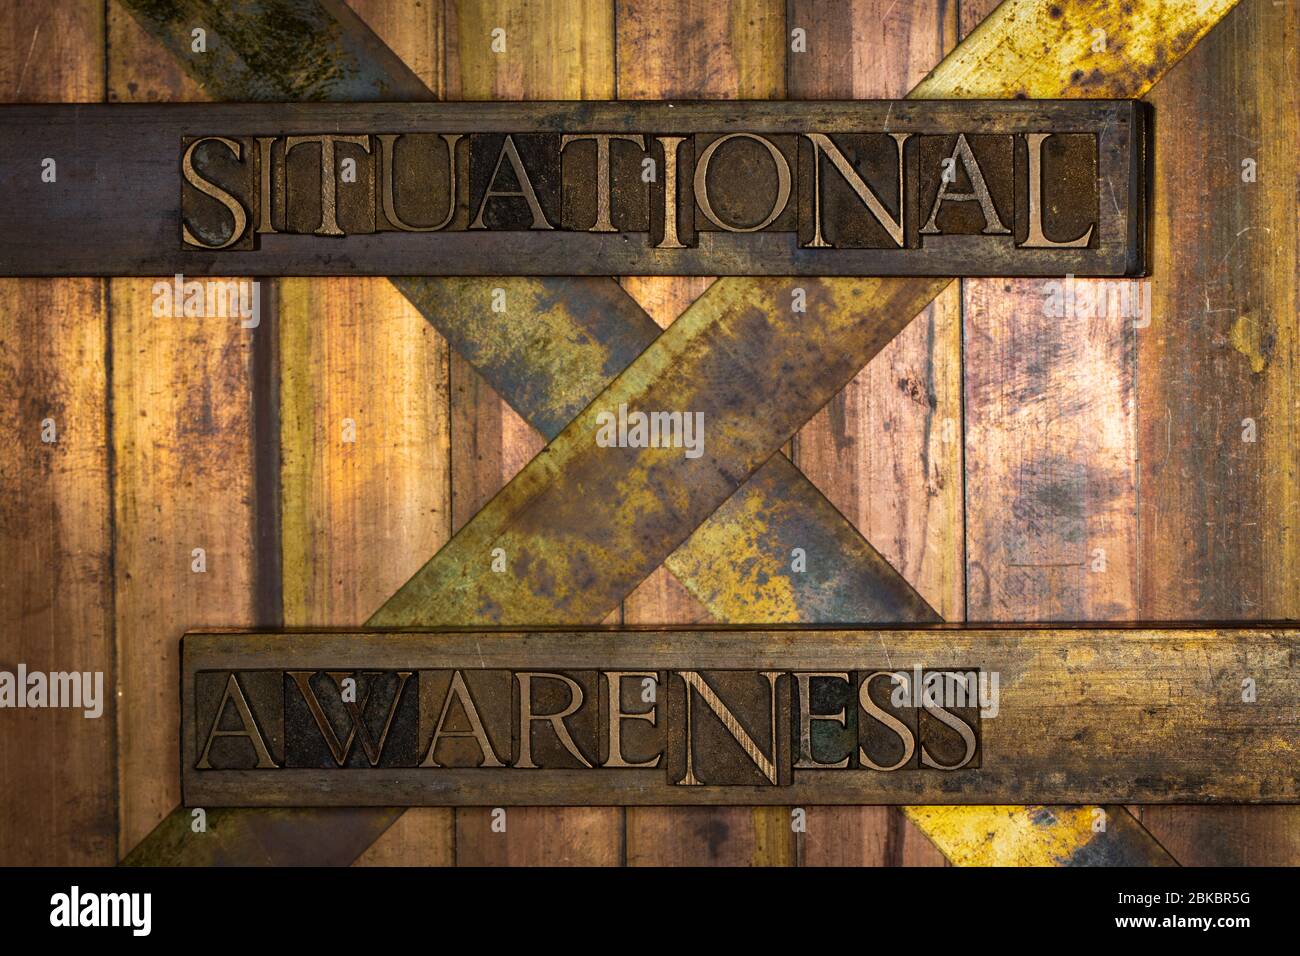 Photo of real authentic typeset letters Situational Awareness text on vintage textured grunge copper and gold background Stock Photo